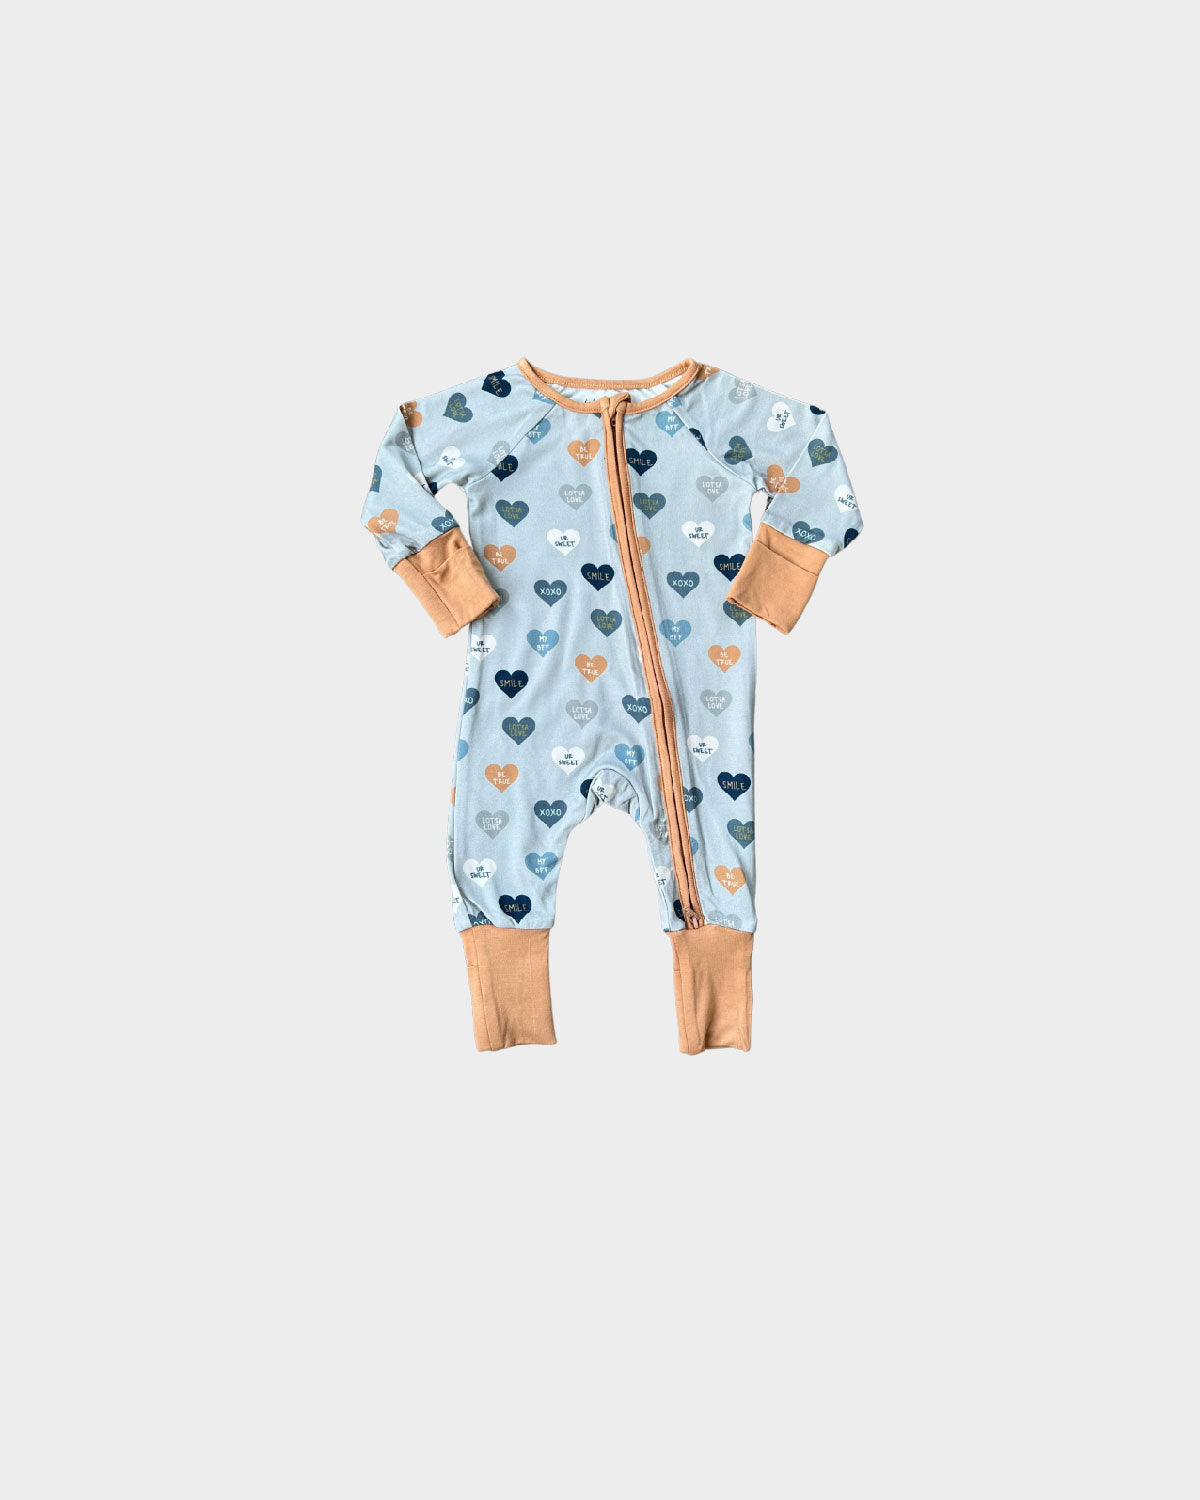 Babysprouts Footless Romper / Boy's Hearts